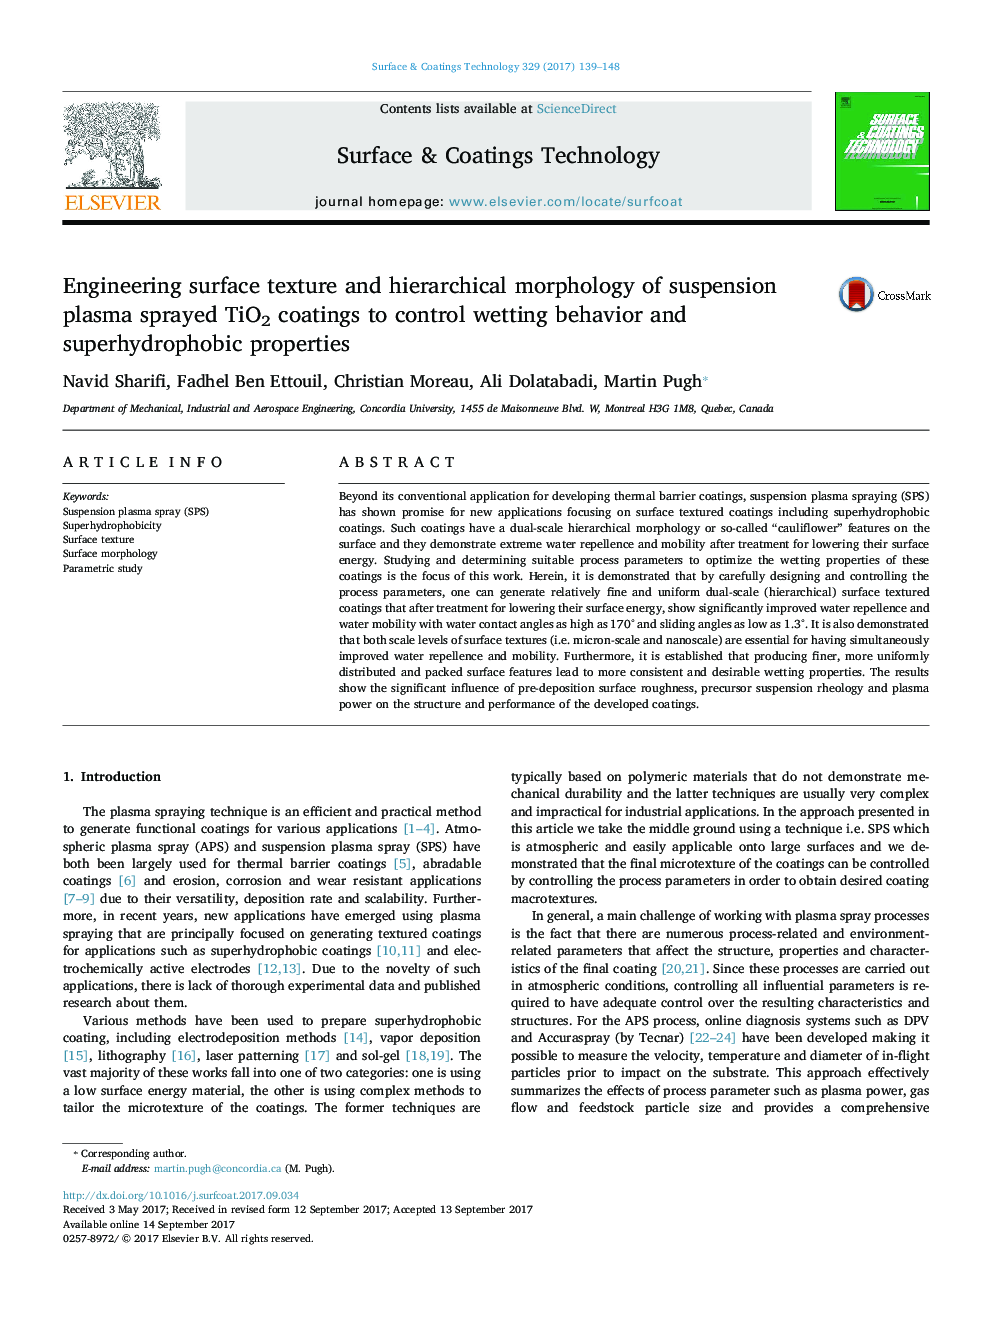 Engineering surface texture and hierarchical morphology of suspension plasma sprayed TiO2 coatings to control wetting behavior and superhydrophobic properties